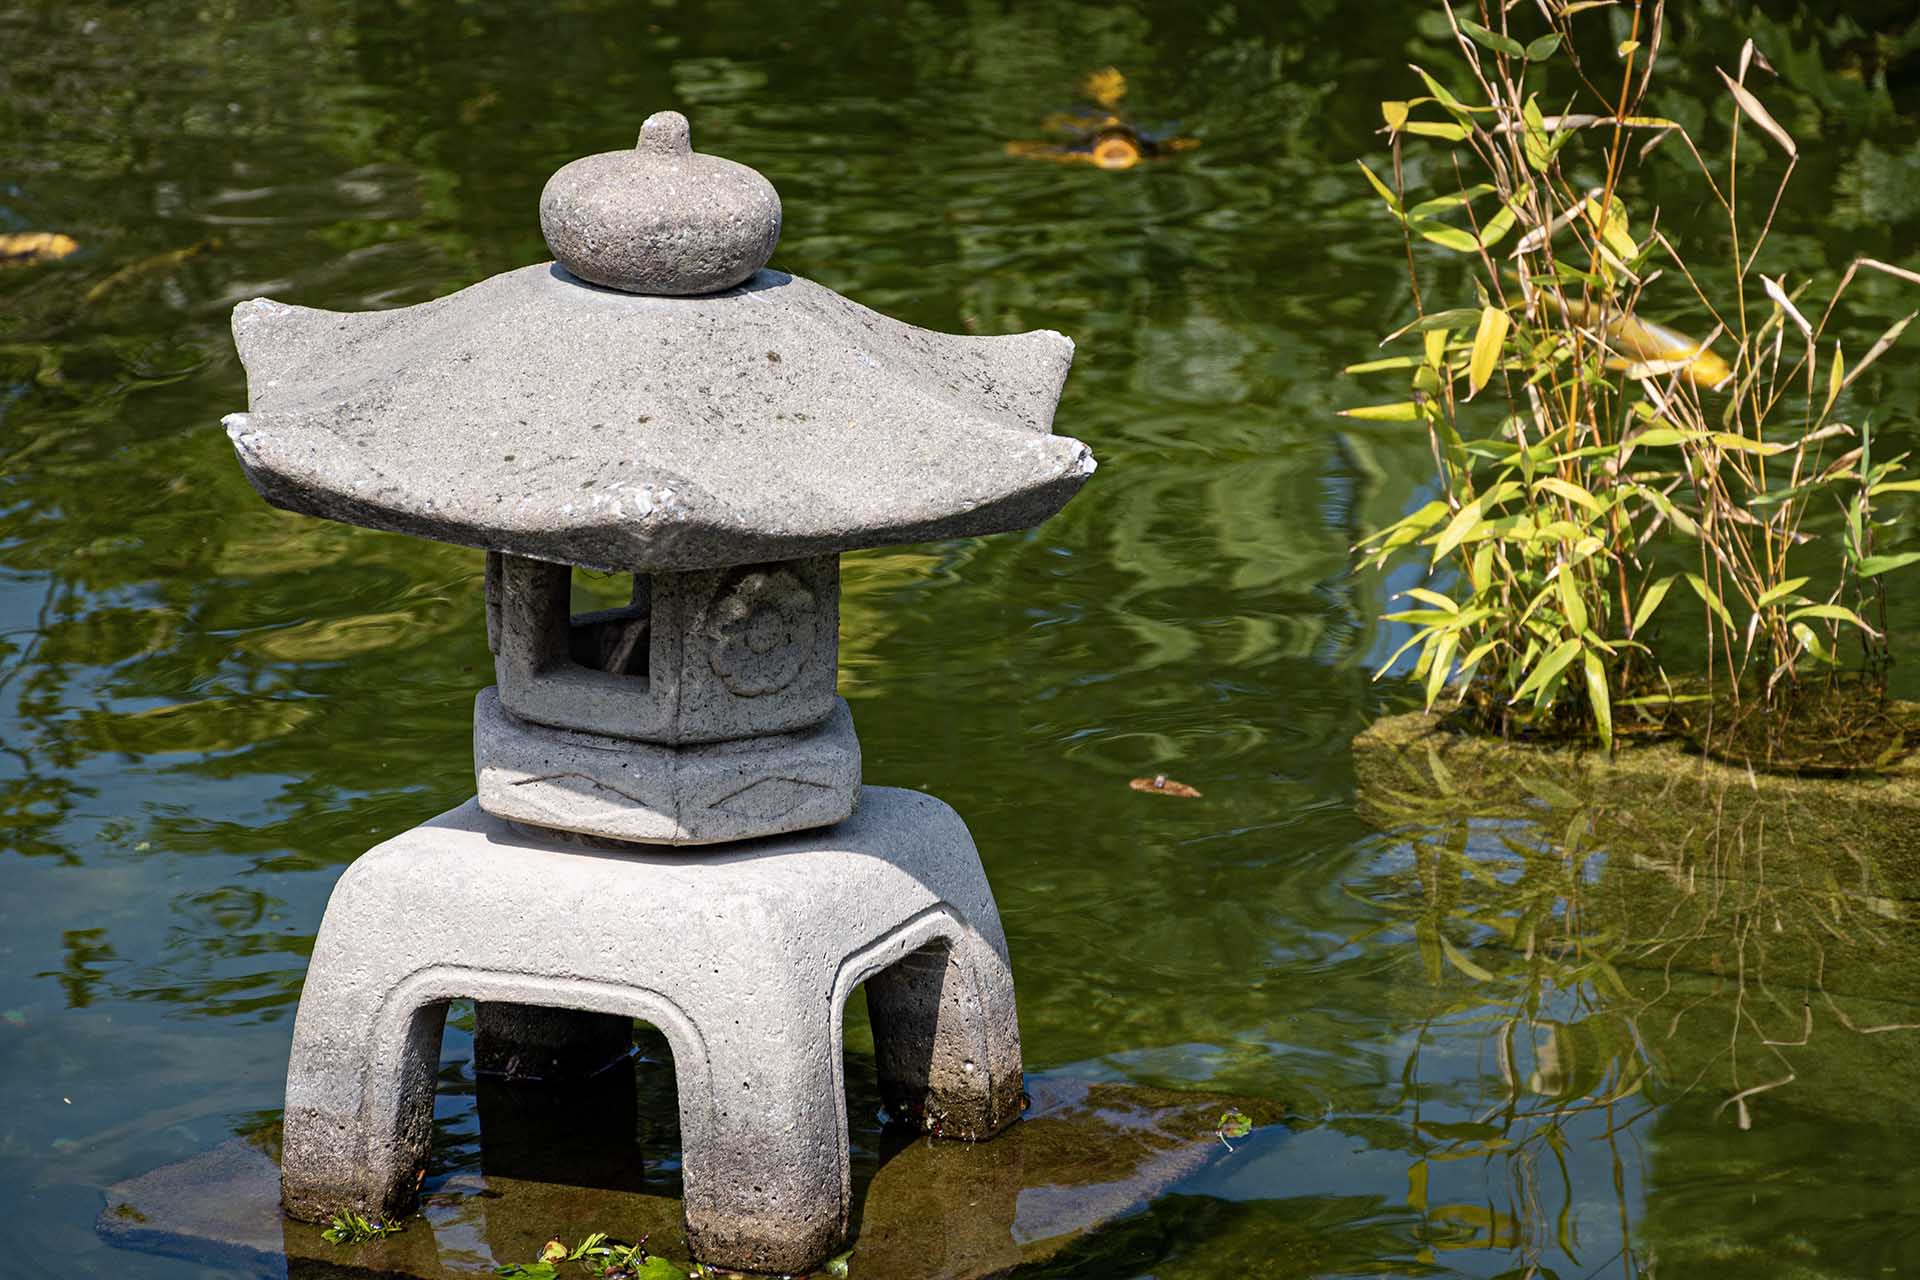 Stone lantern made by cement casting, is already damaged on edge